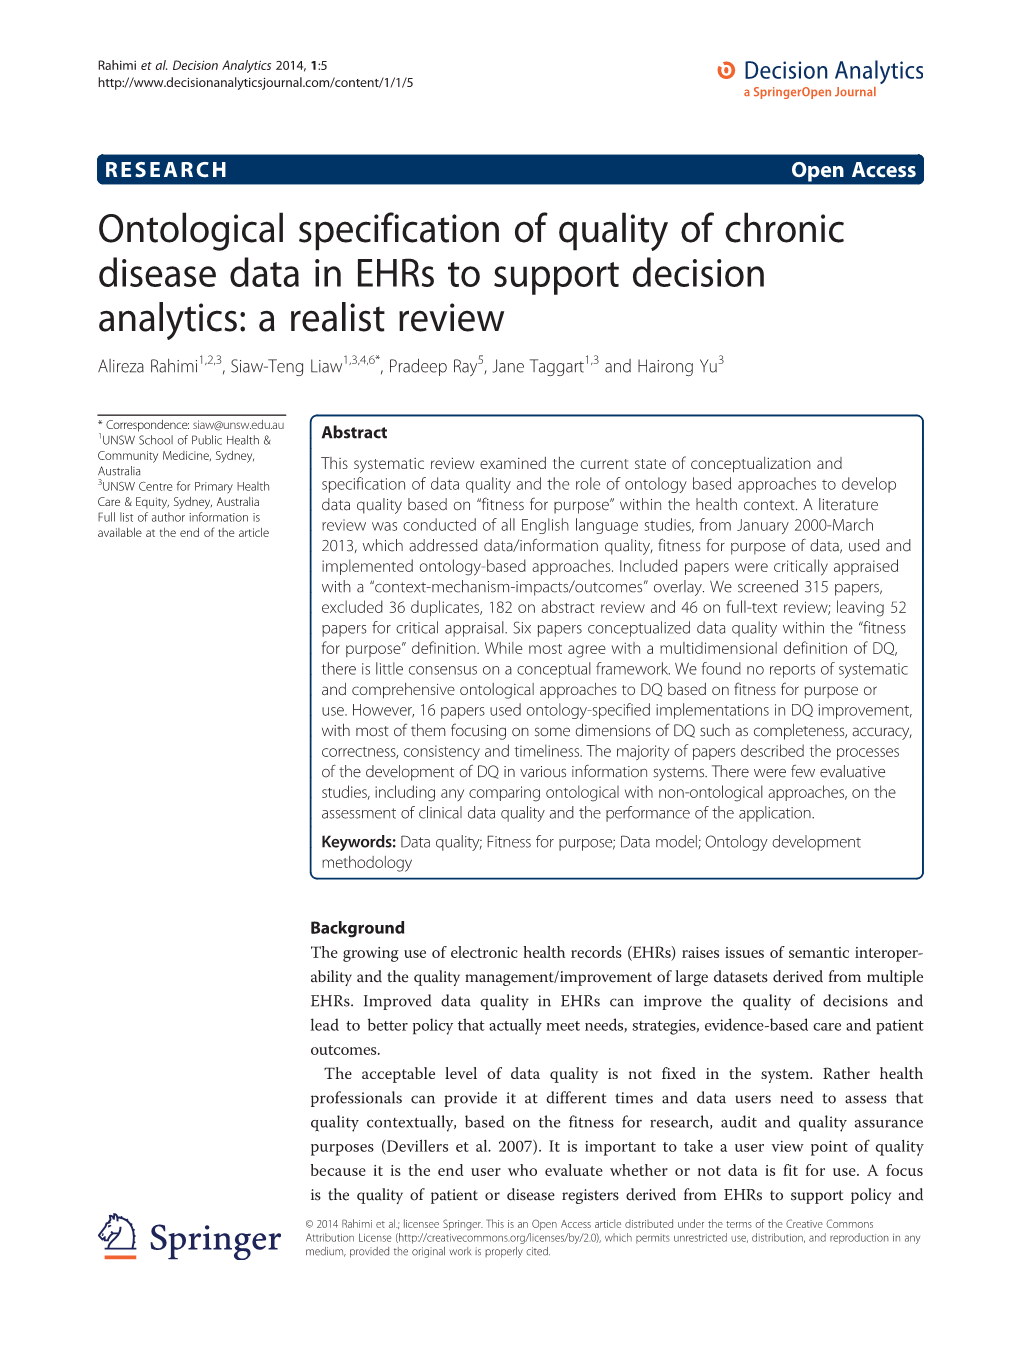 Ontological Specification of Quality of Chronic Disease Data in Ehrs To